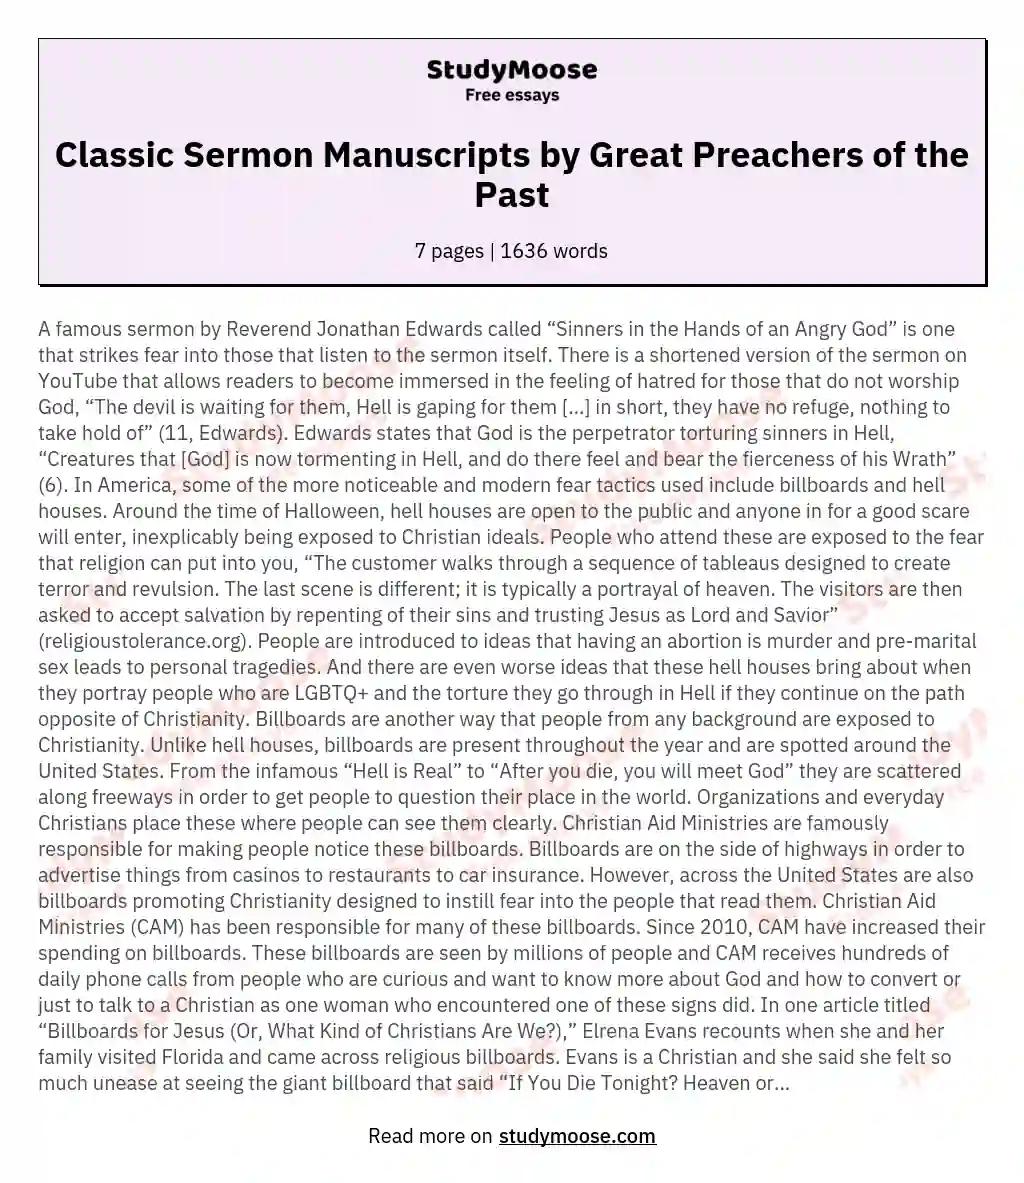 Classic Sermon Manuscripts by Great Preachers of the Past essay